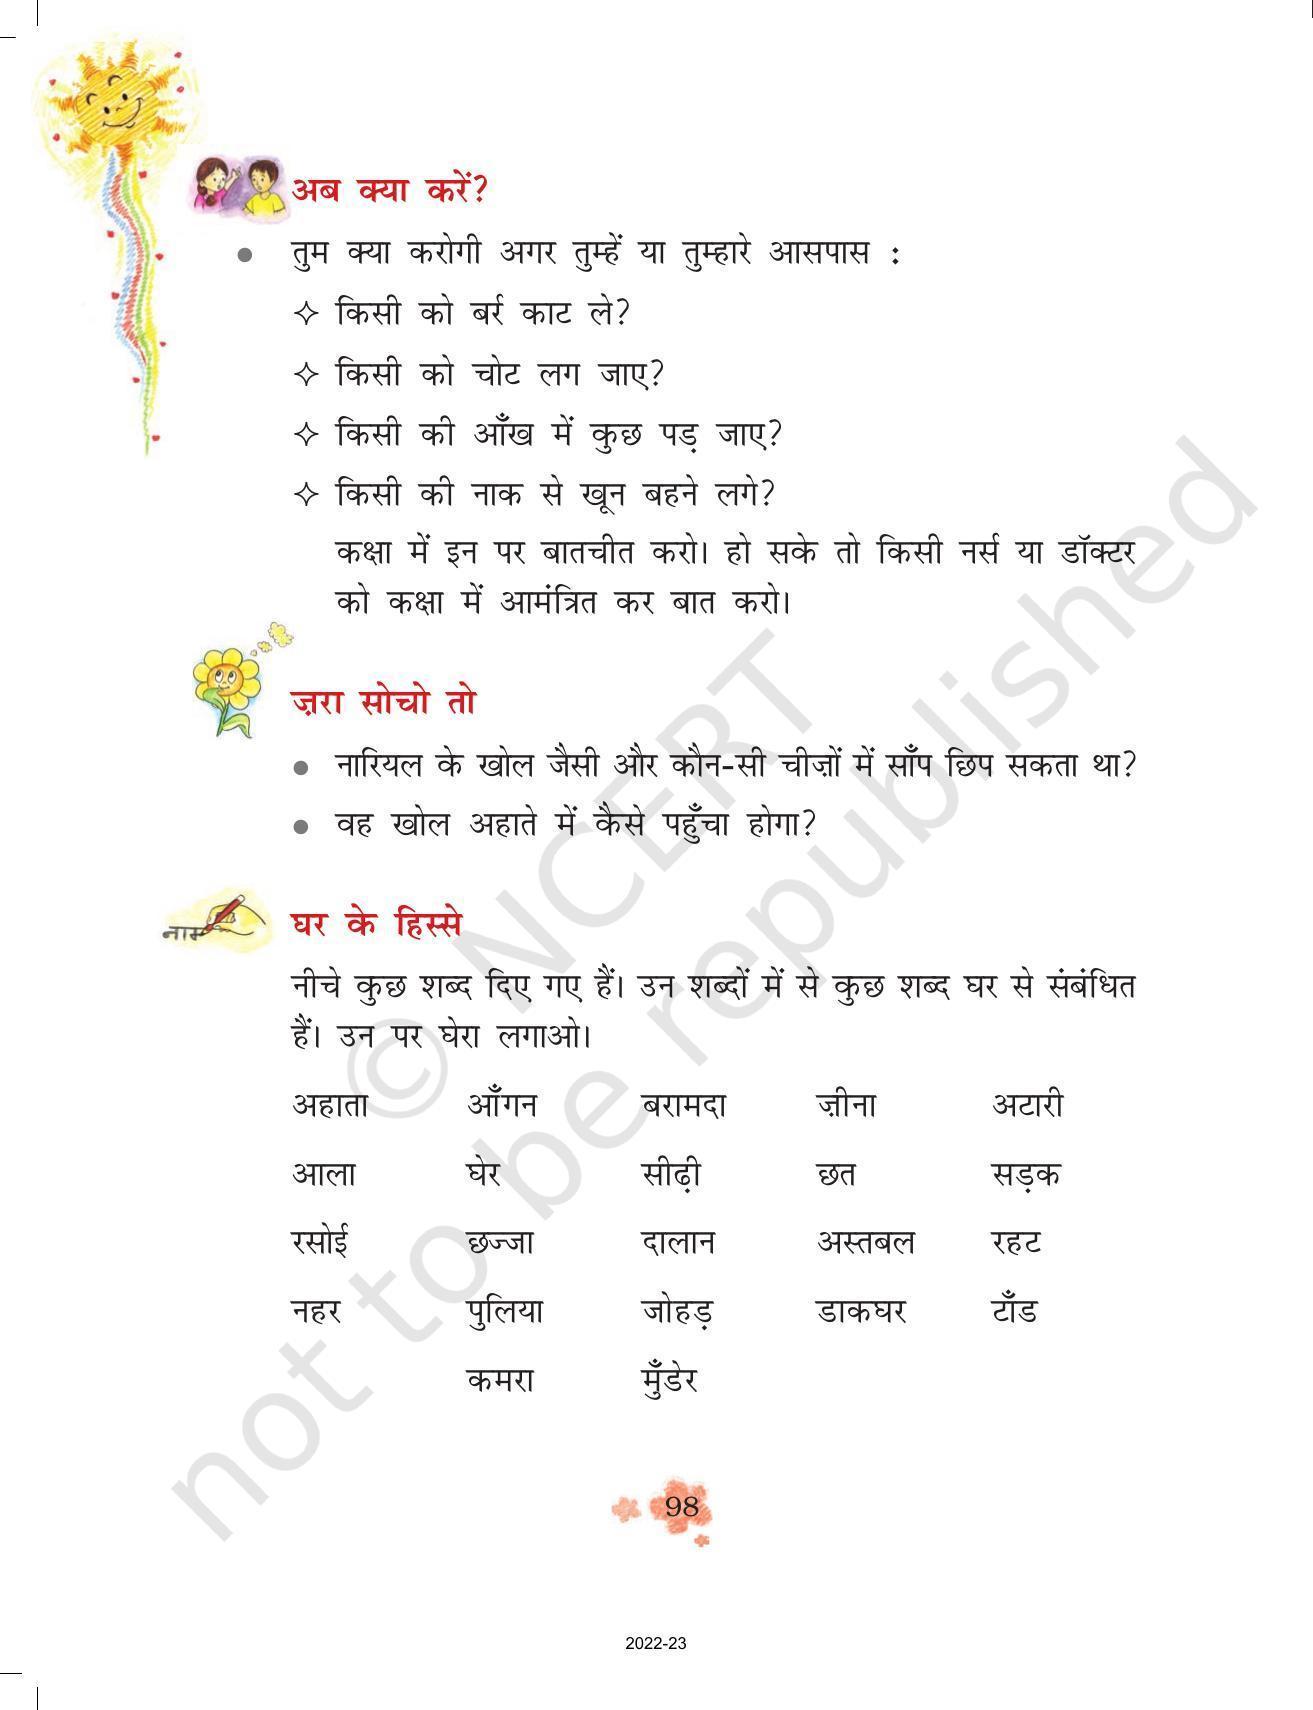 NCERT Book for Class 3 Hindi Chapter 10-जब मुझे साँप ने काटा - Page 6